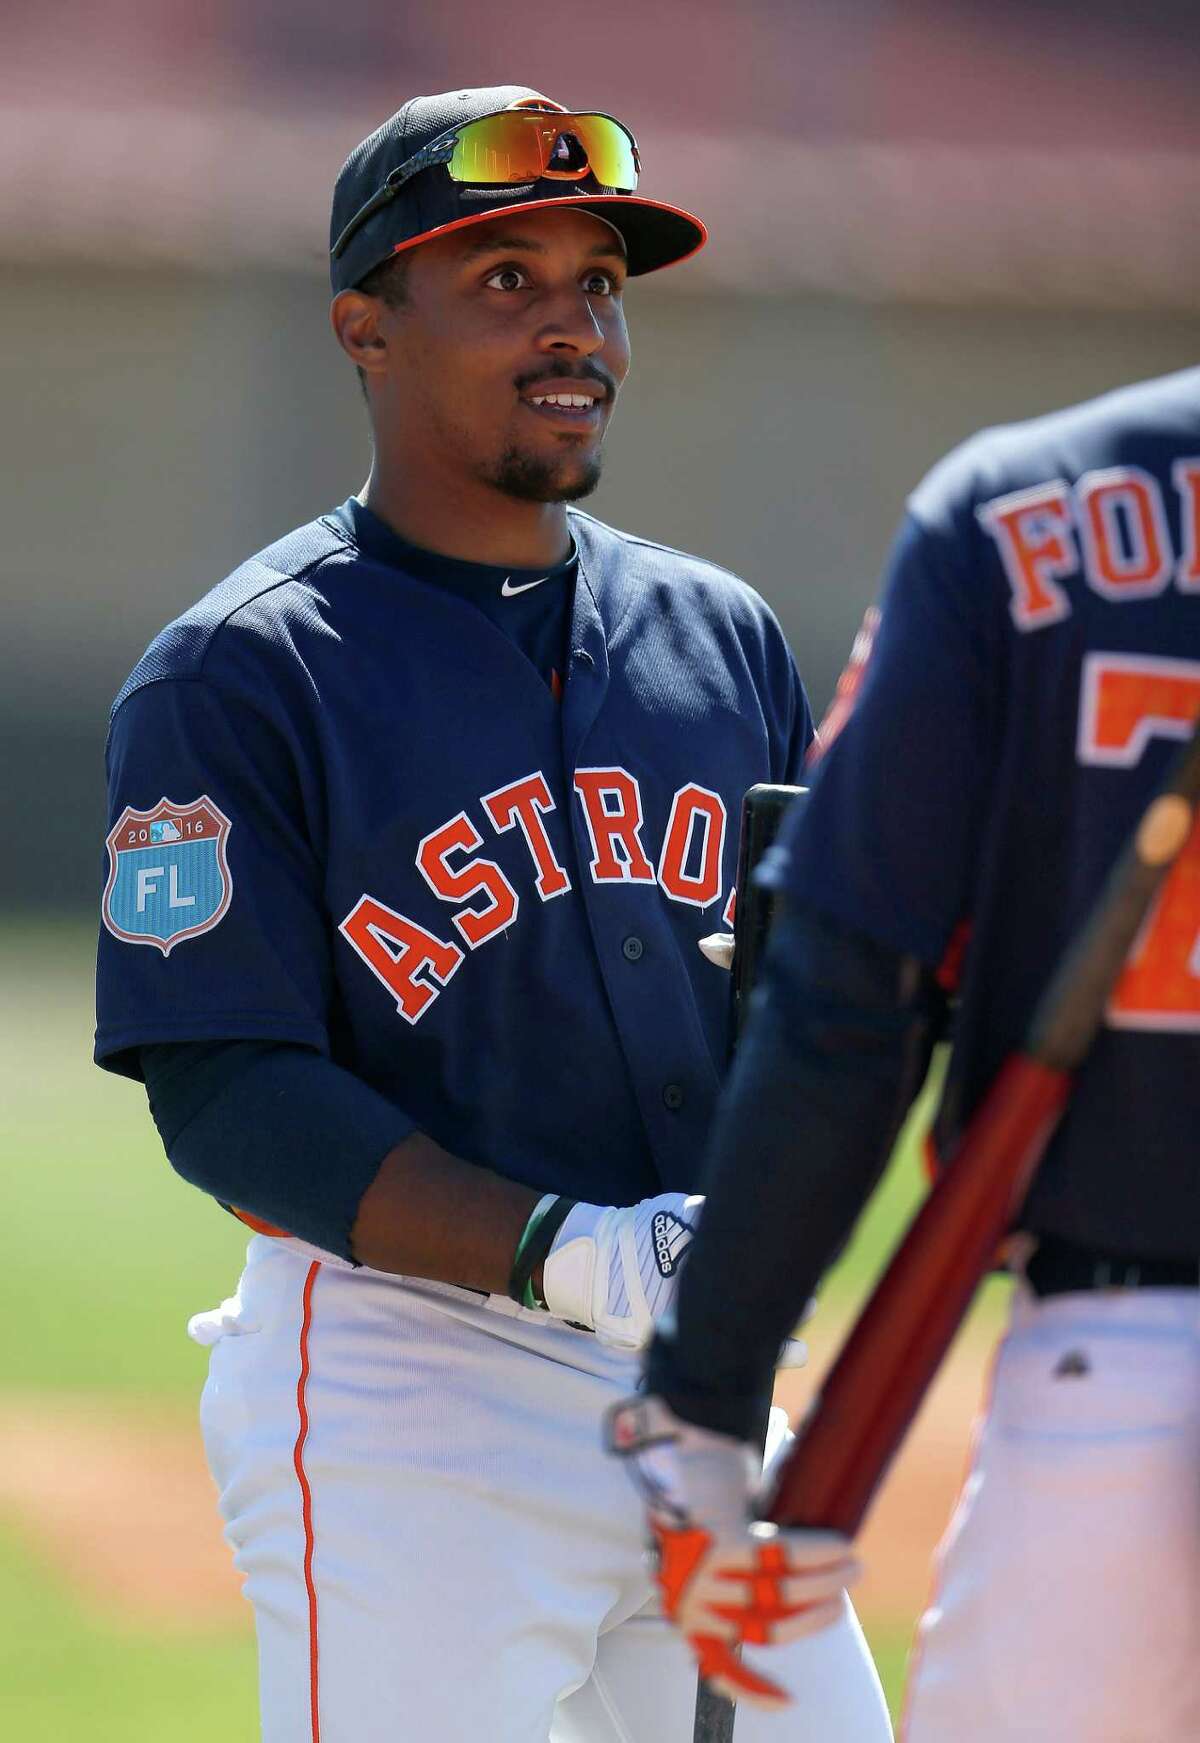 Tony Kemp was batting .298 with 21 walks to 22 strikeouts in 34 games with Class AAA Fresno.